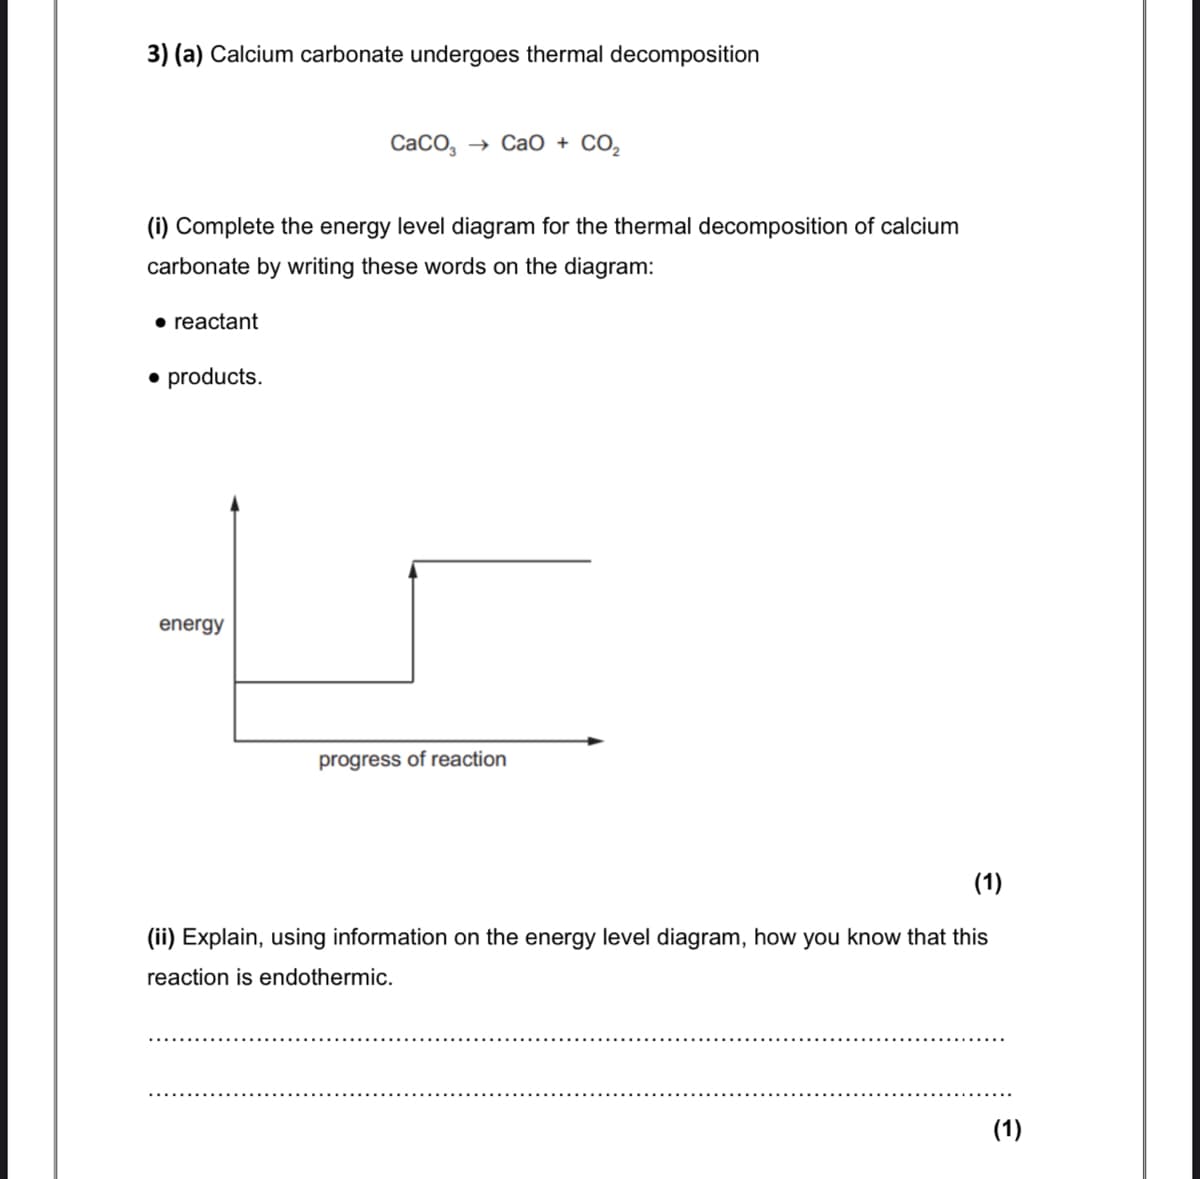 3) (a) Calcium carbonate undergoes thermal decomposition
СаCо,
> Сао + СО,
(i) Complete the energy level diagram for the thermal decomposition of calcium
carbonate by writing these words on the diagram:
• reactant
• products.
energy
progress of reaction
(1)
(ii) Explain, using information on the energy level diagram, how you know that this
reaction is endothermic.
(1)
